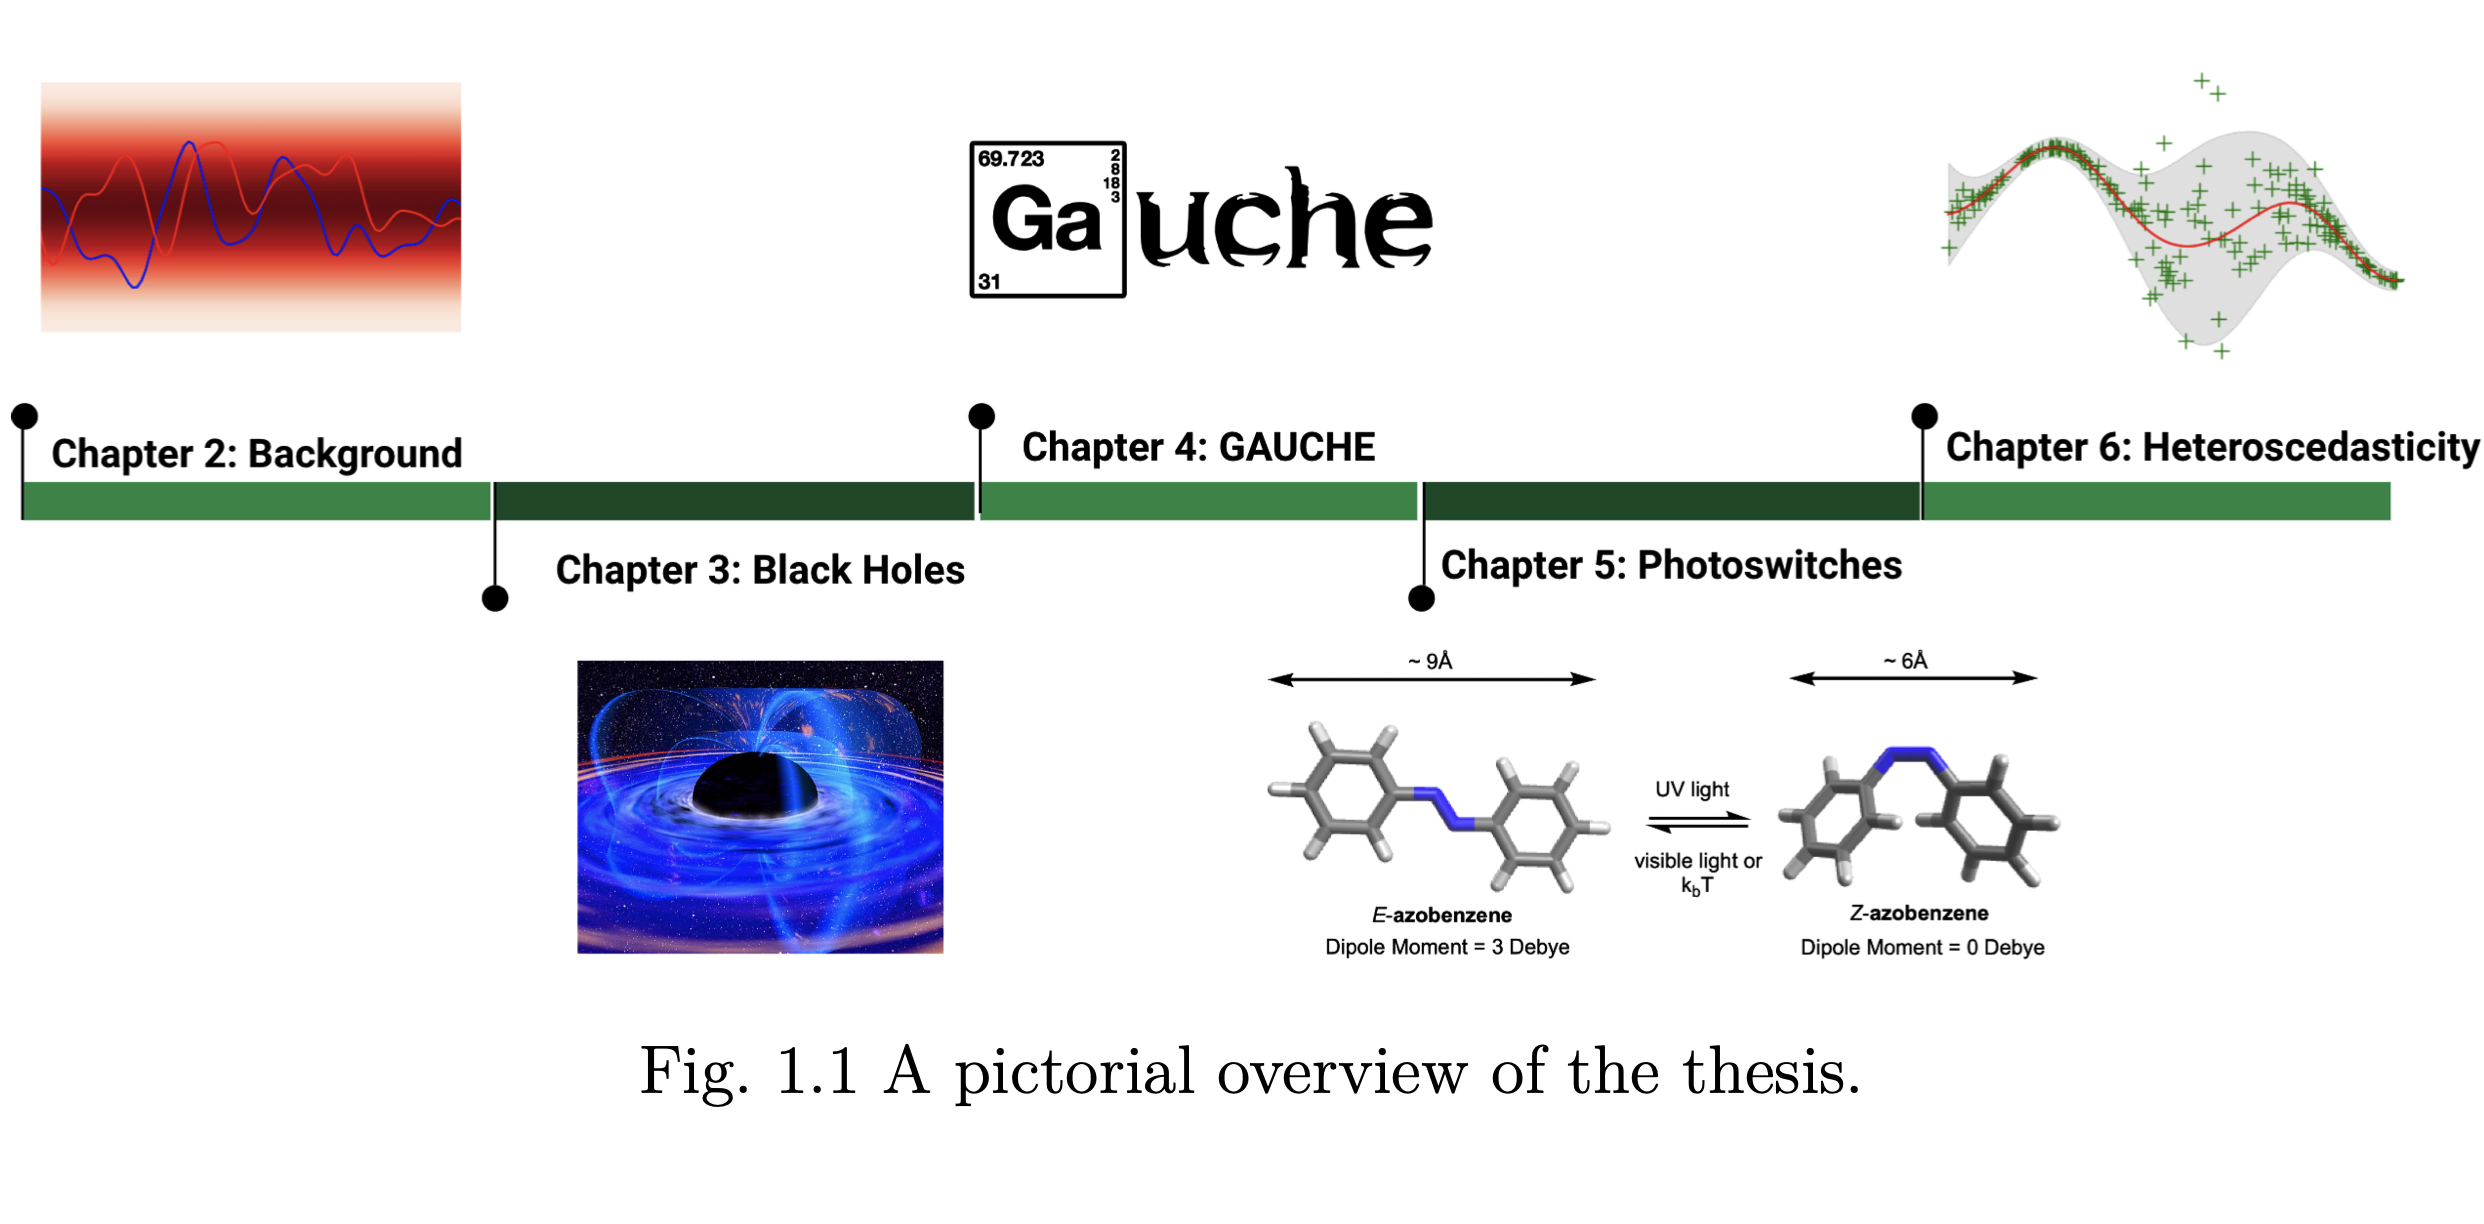 Applications of Gaussian Processes at Extreme Lengthscales: From
  Molecules to Black Holes